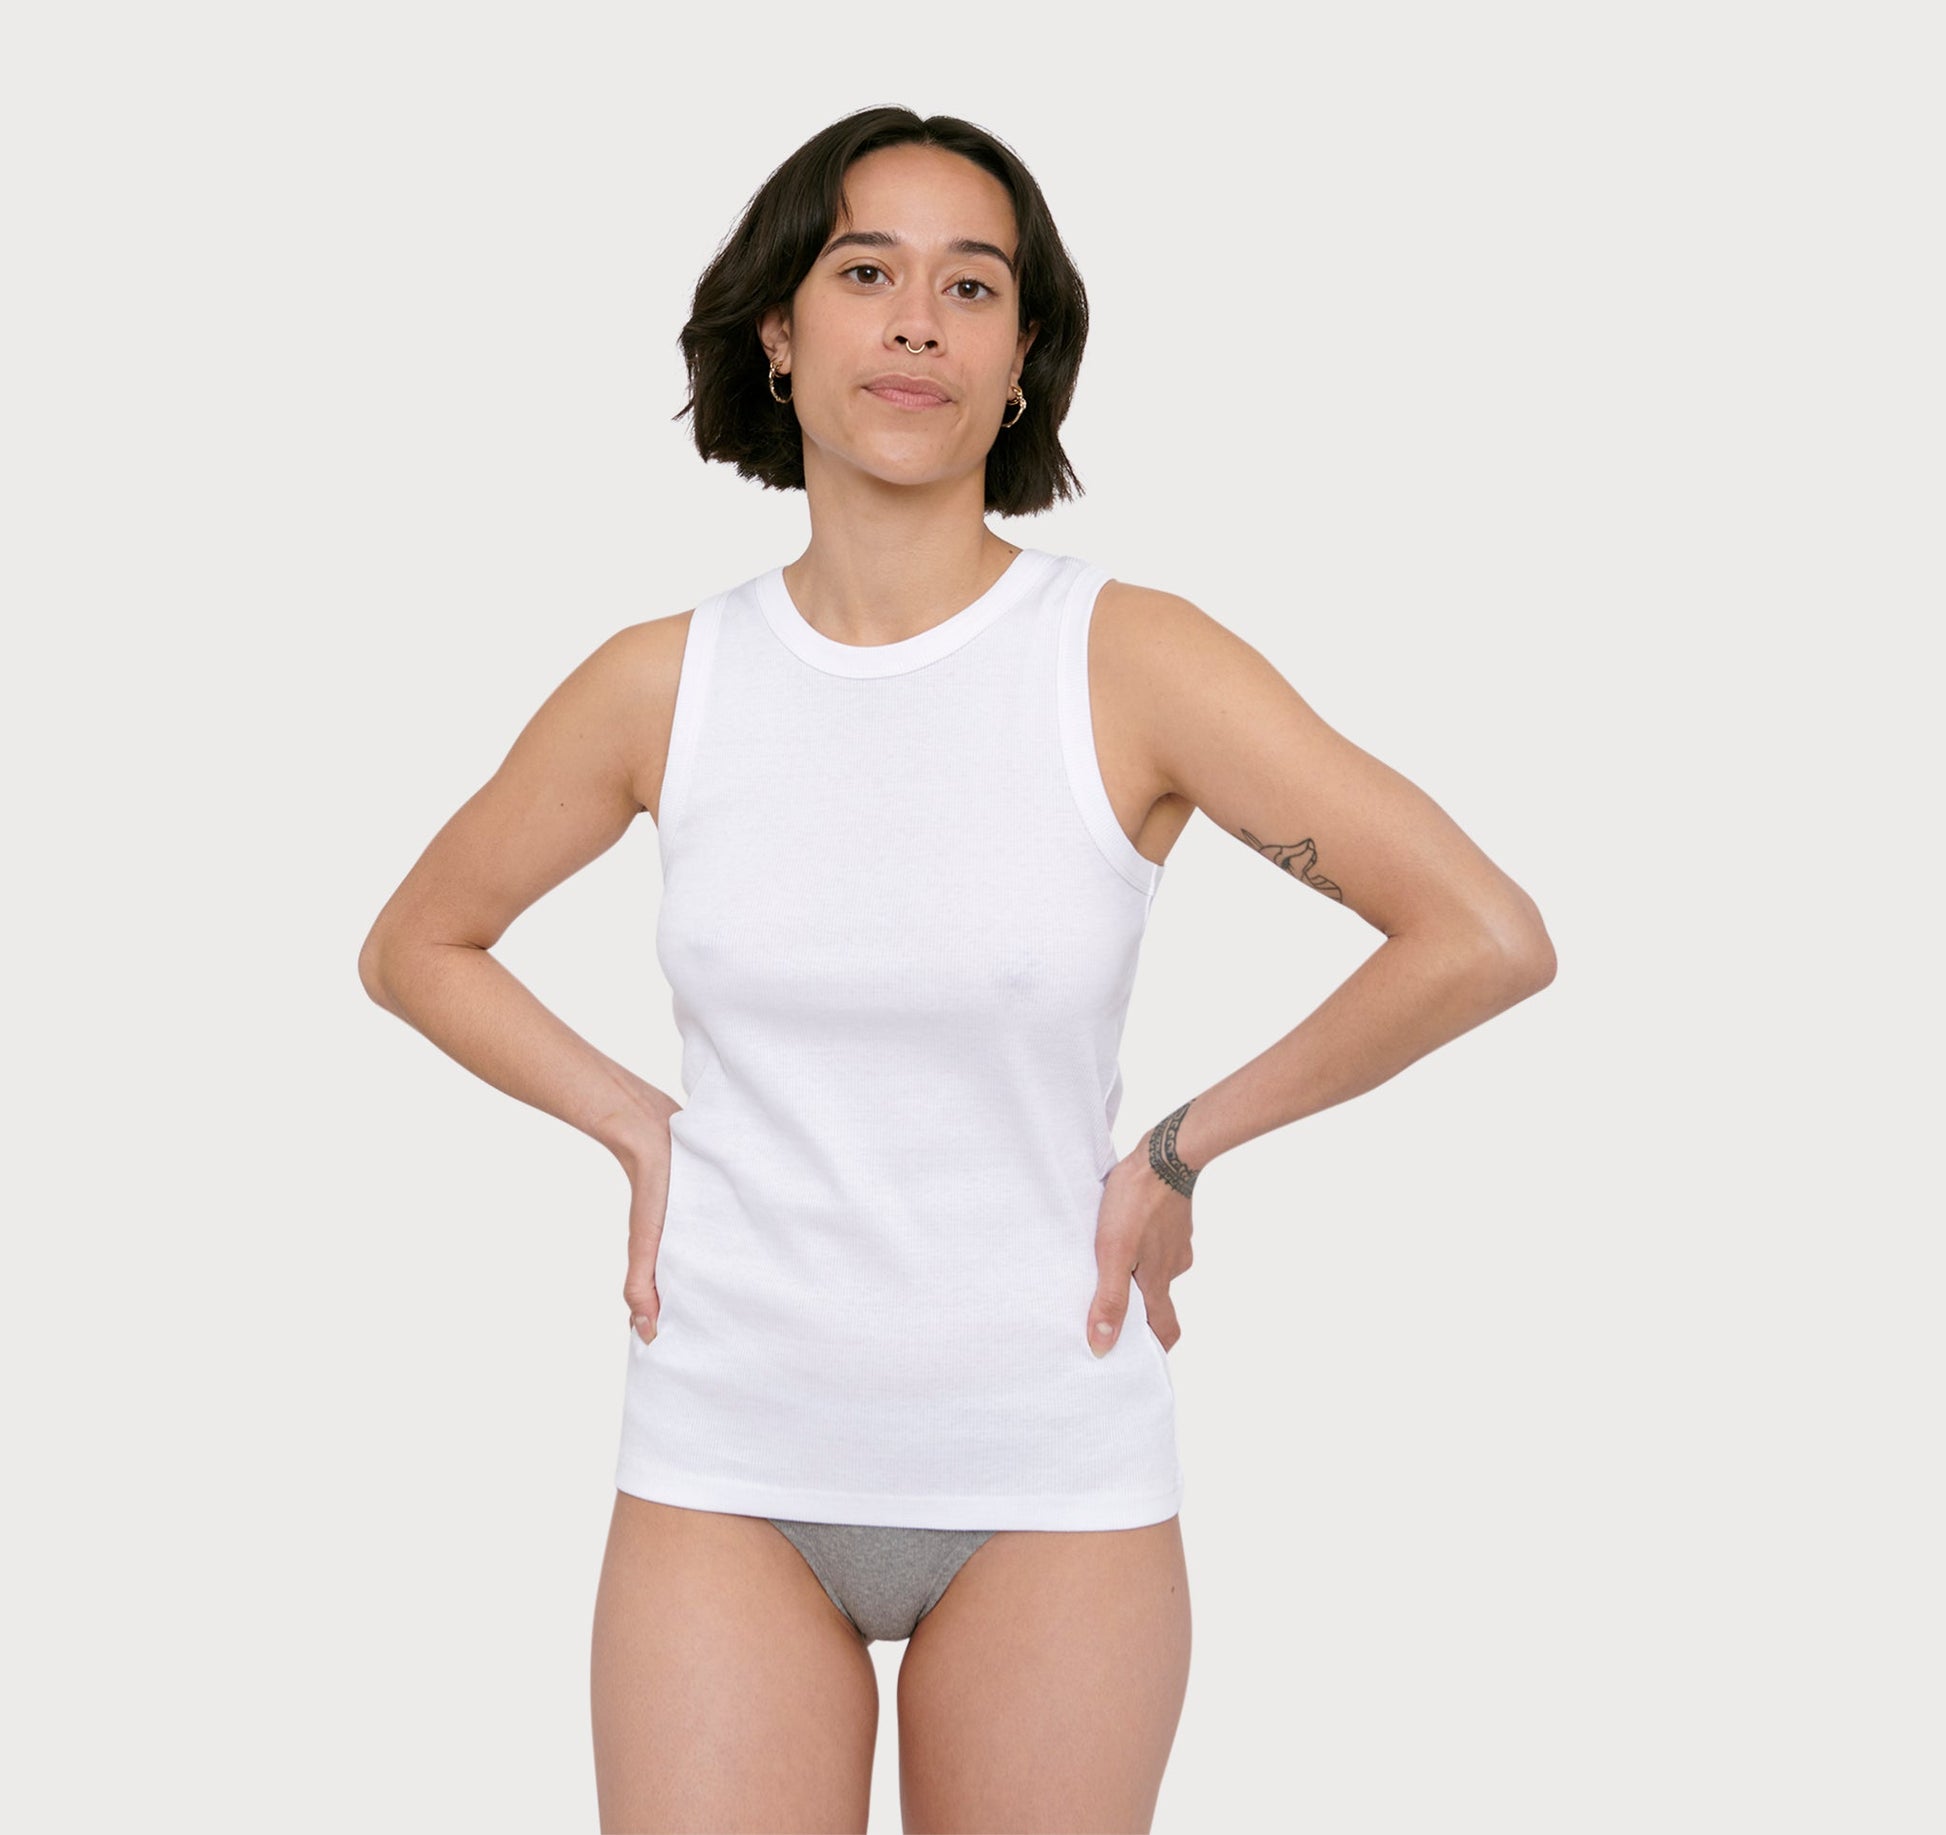 Basic Cotton 100% COTTON Women's Ribbed Tank Top. Proudly Made in